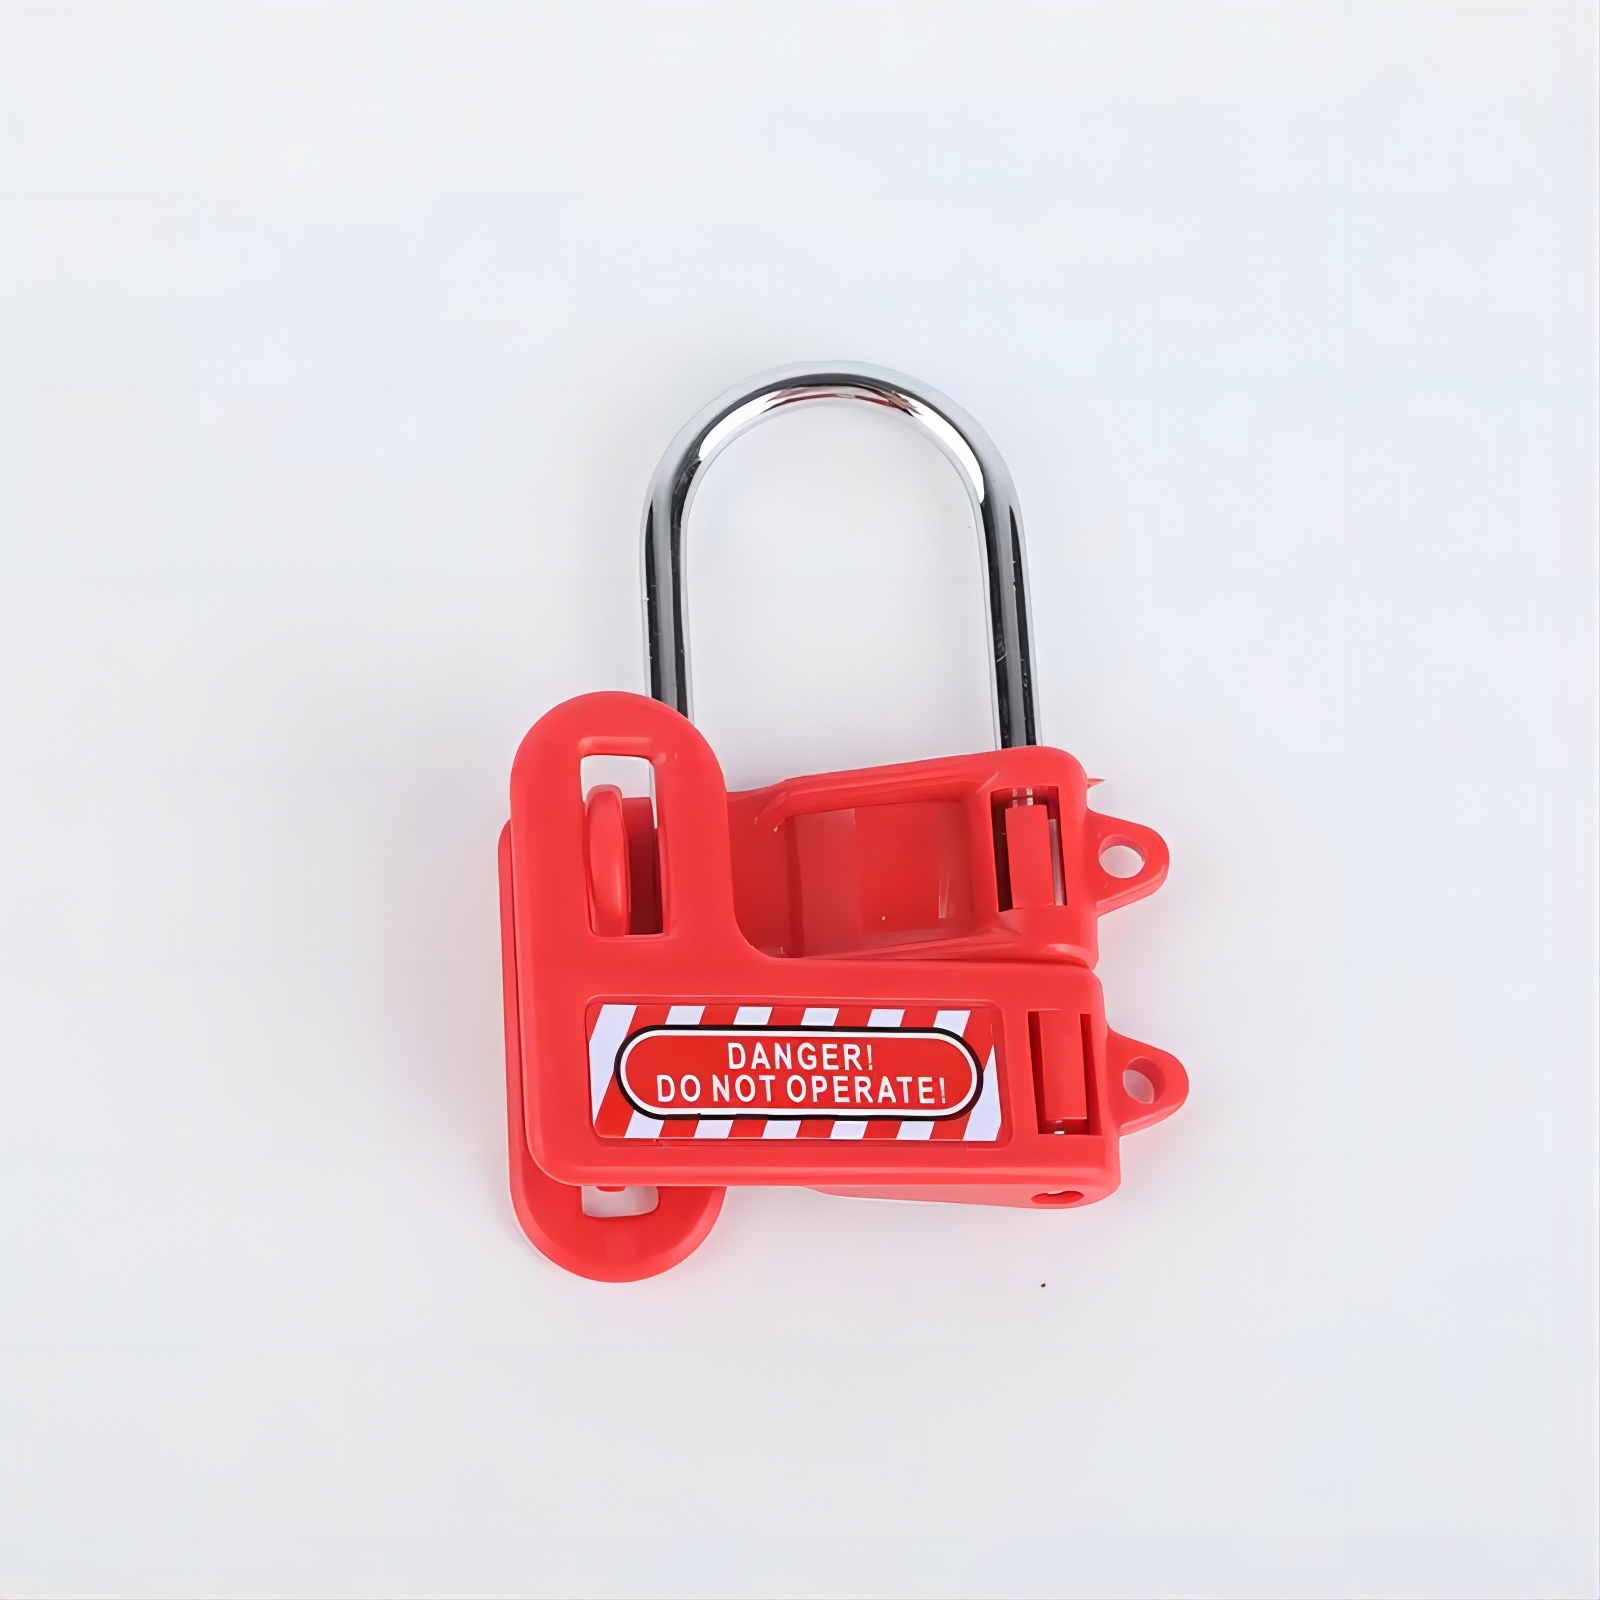 Protect your property with butterfly anti-pry hasp locks